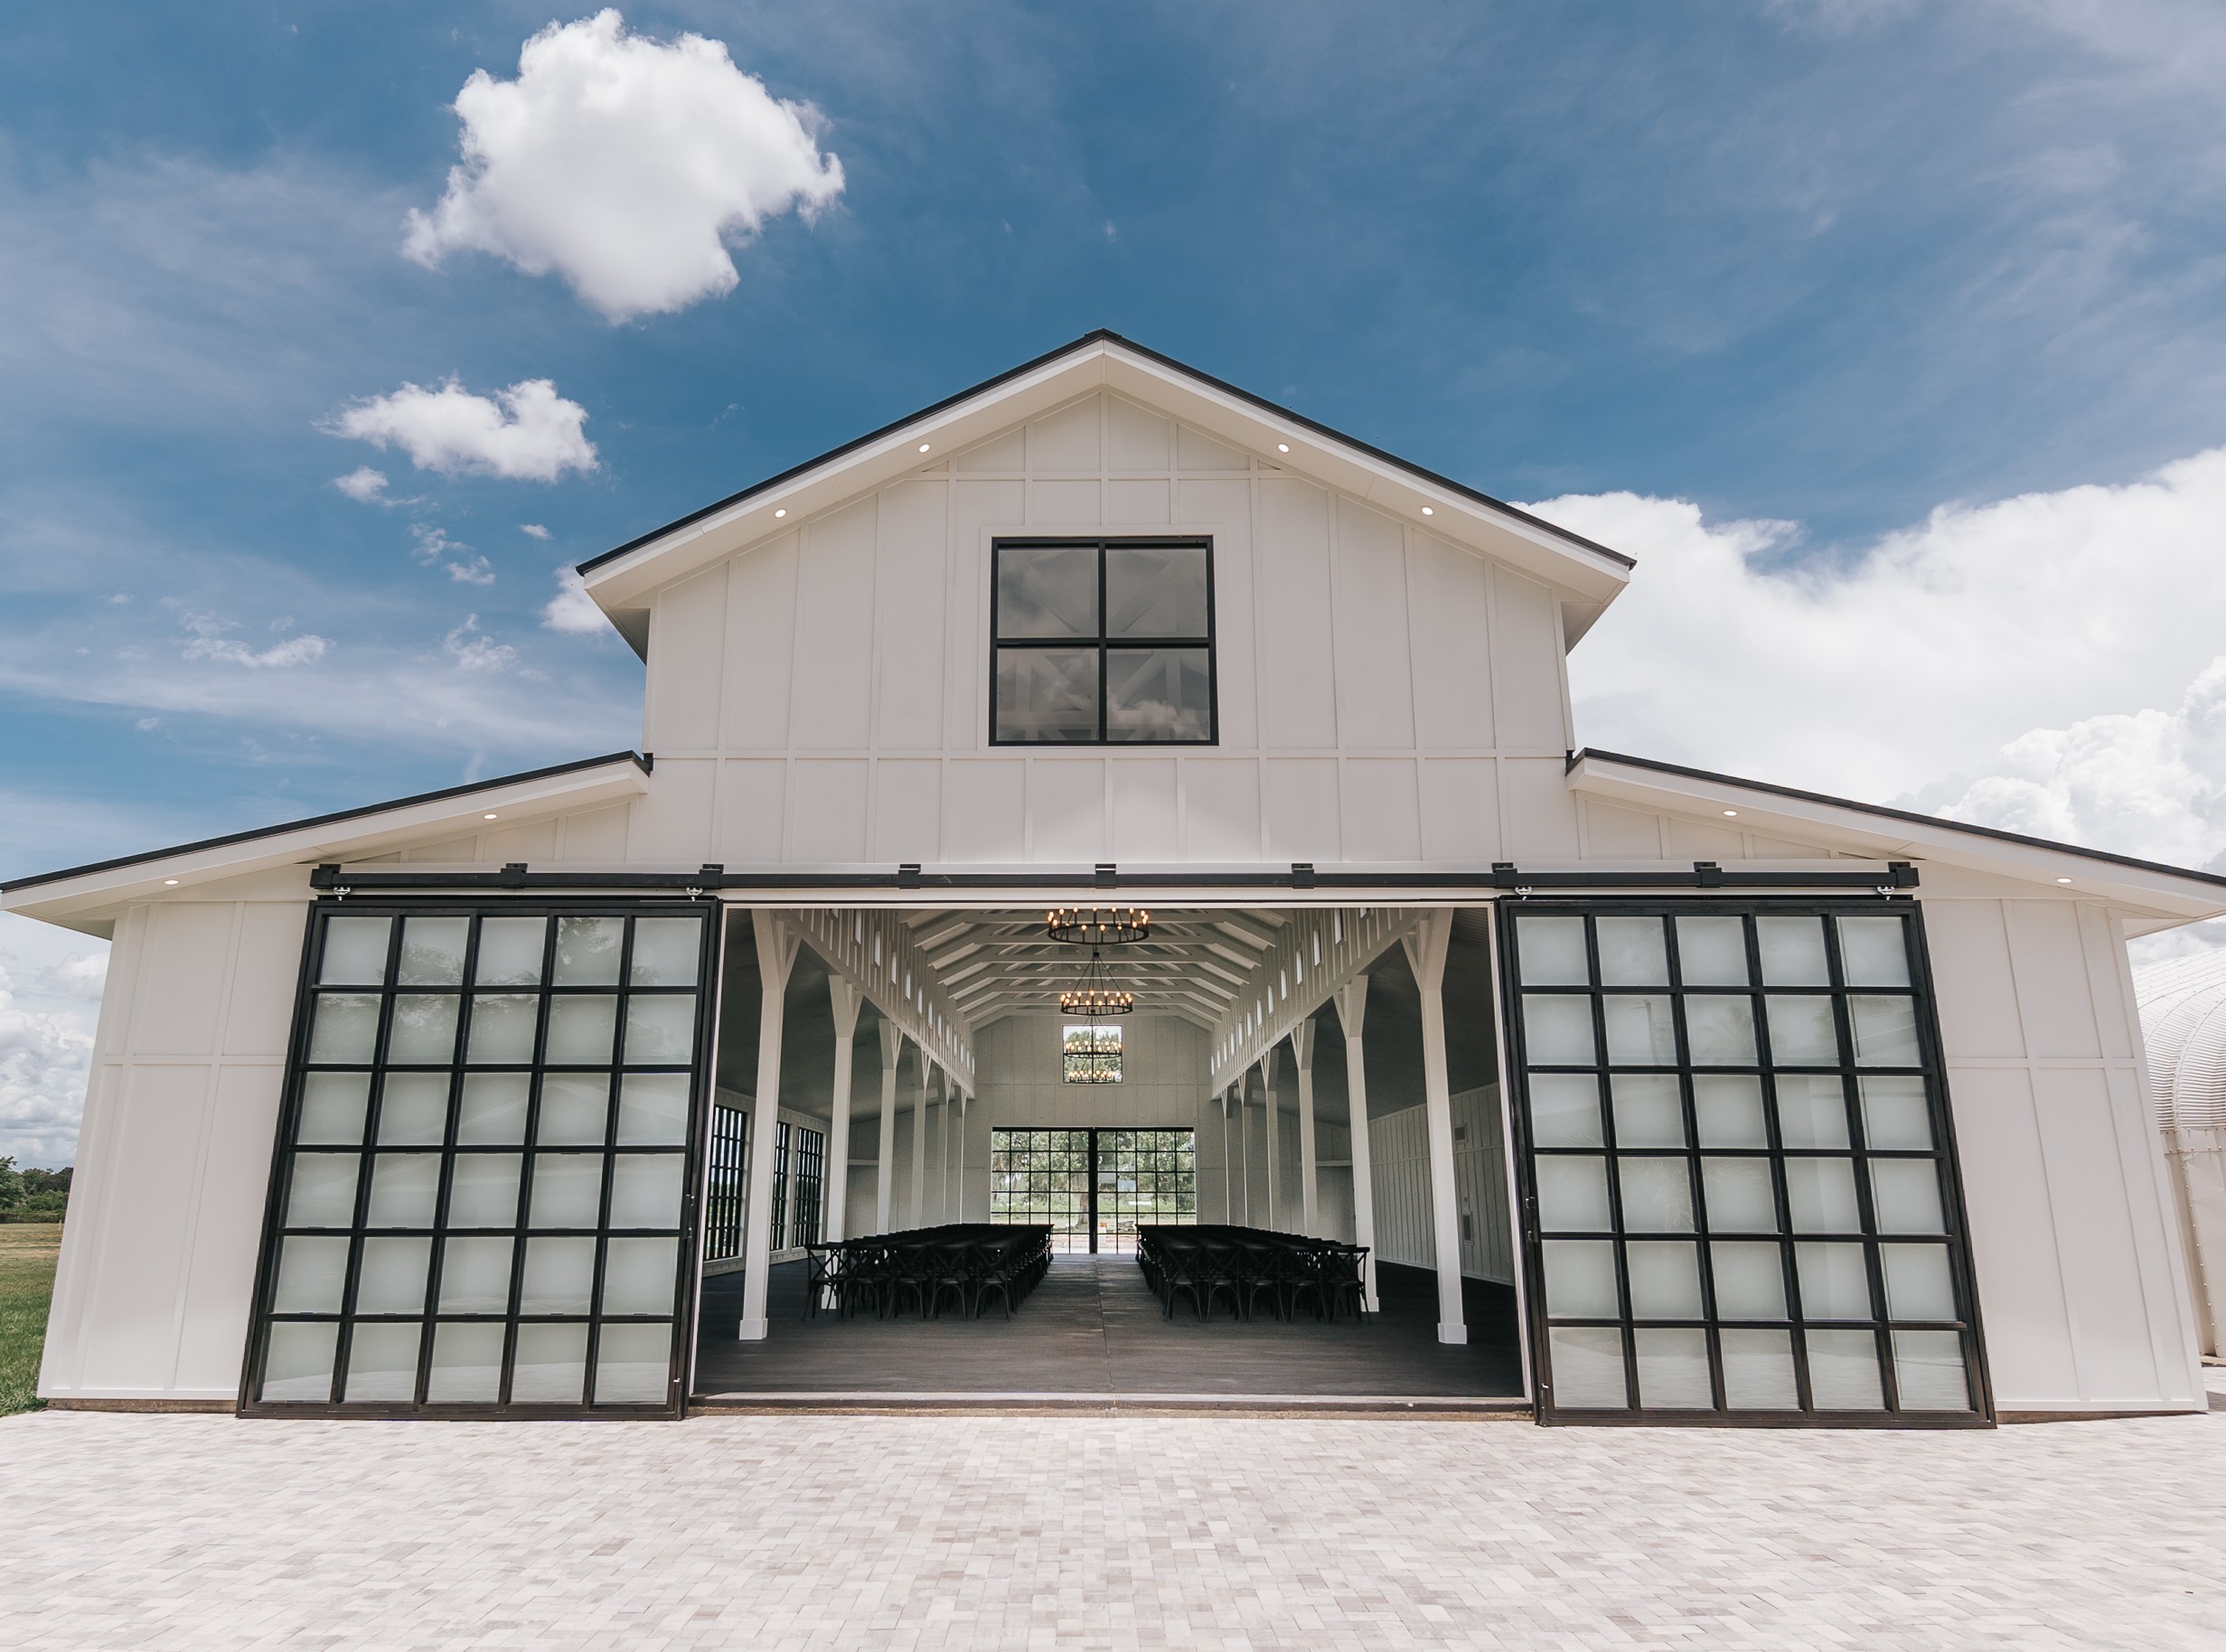 A Florida Wedding venue featuring an elegant white barn entrance adorned with glass doors.